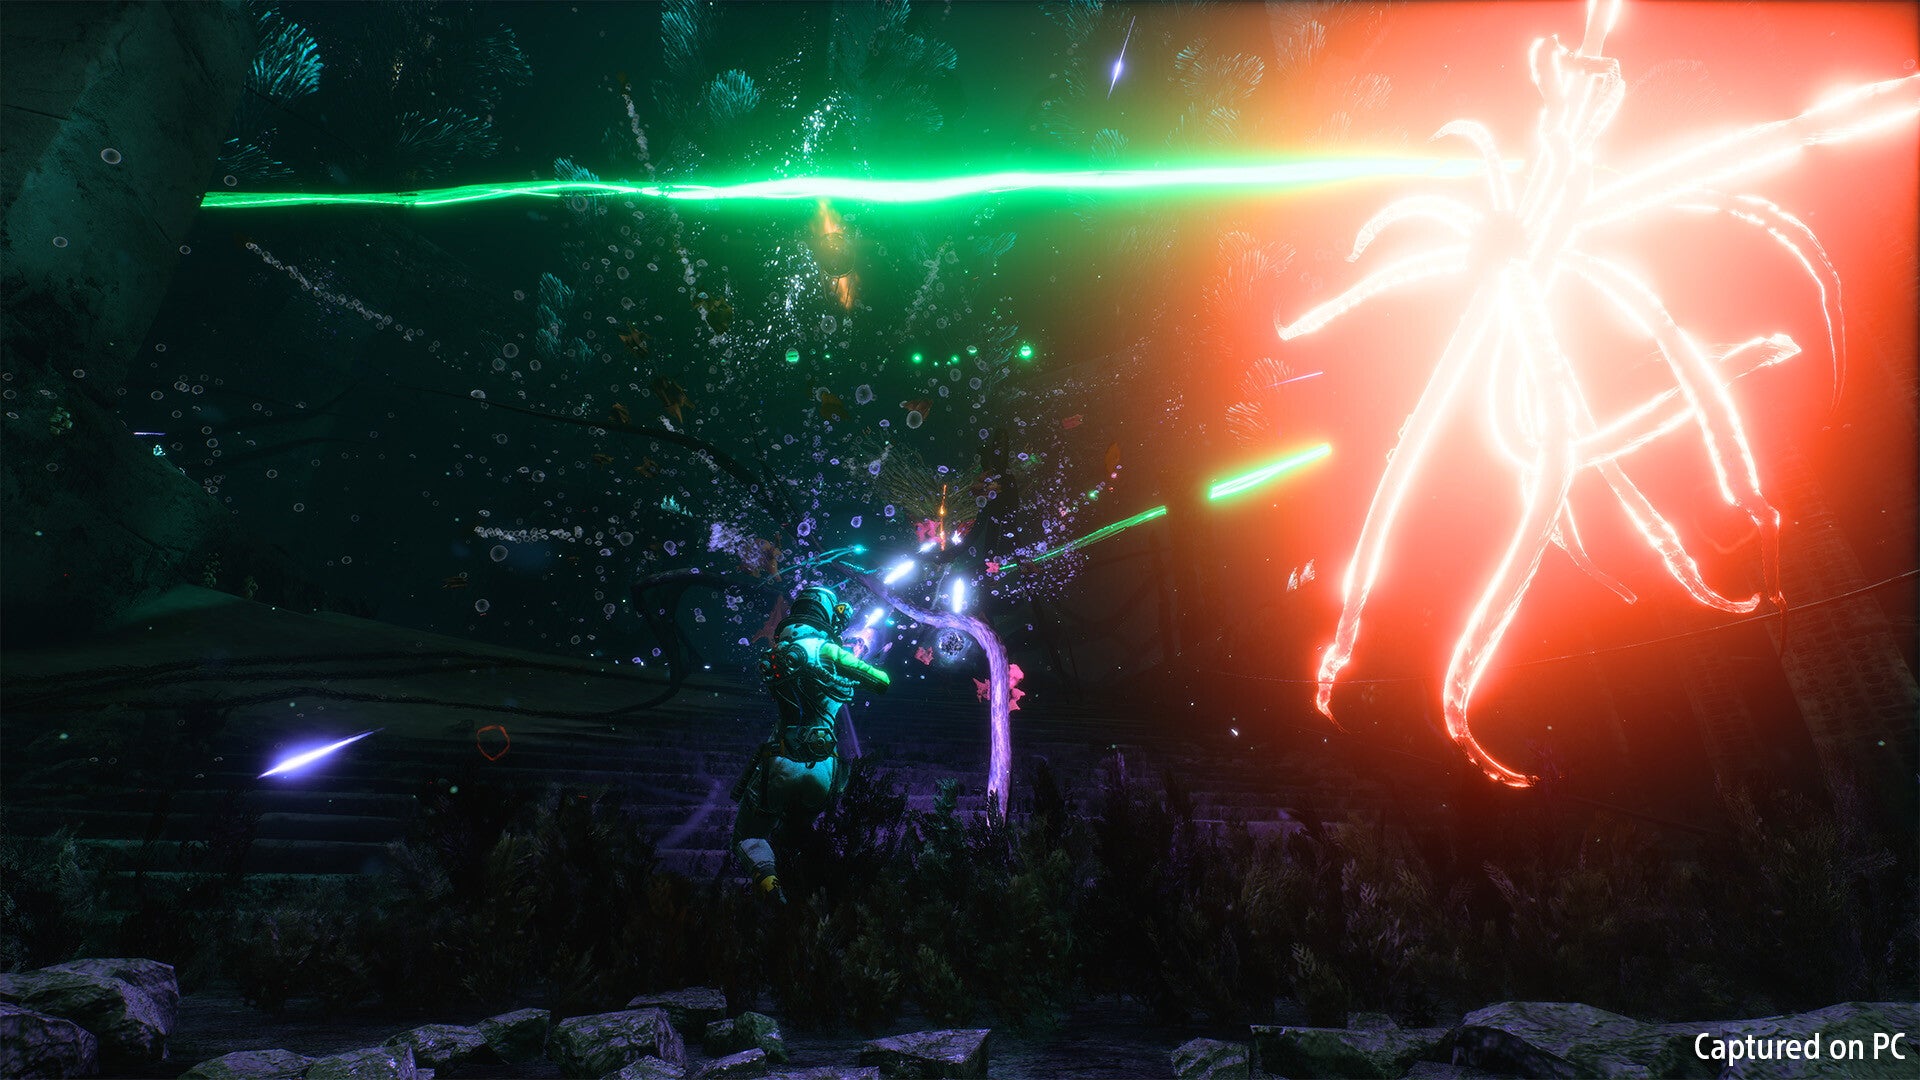 In Returnal, Selene shoots at one floating alien while another charges up an attack.